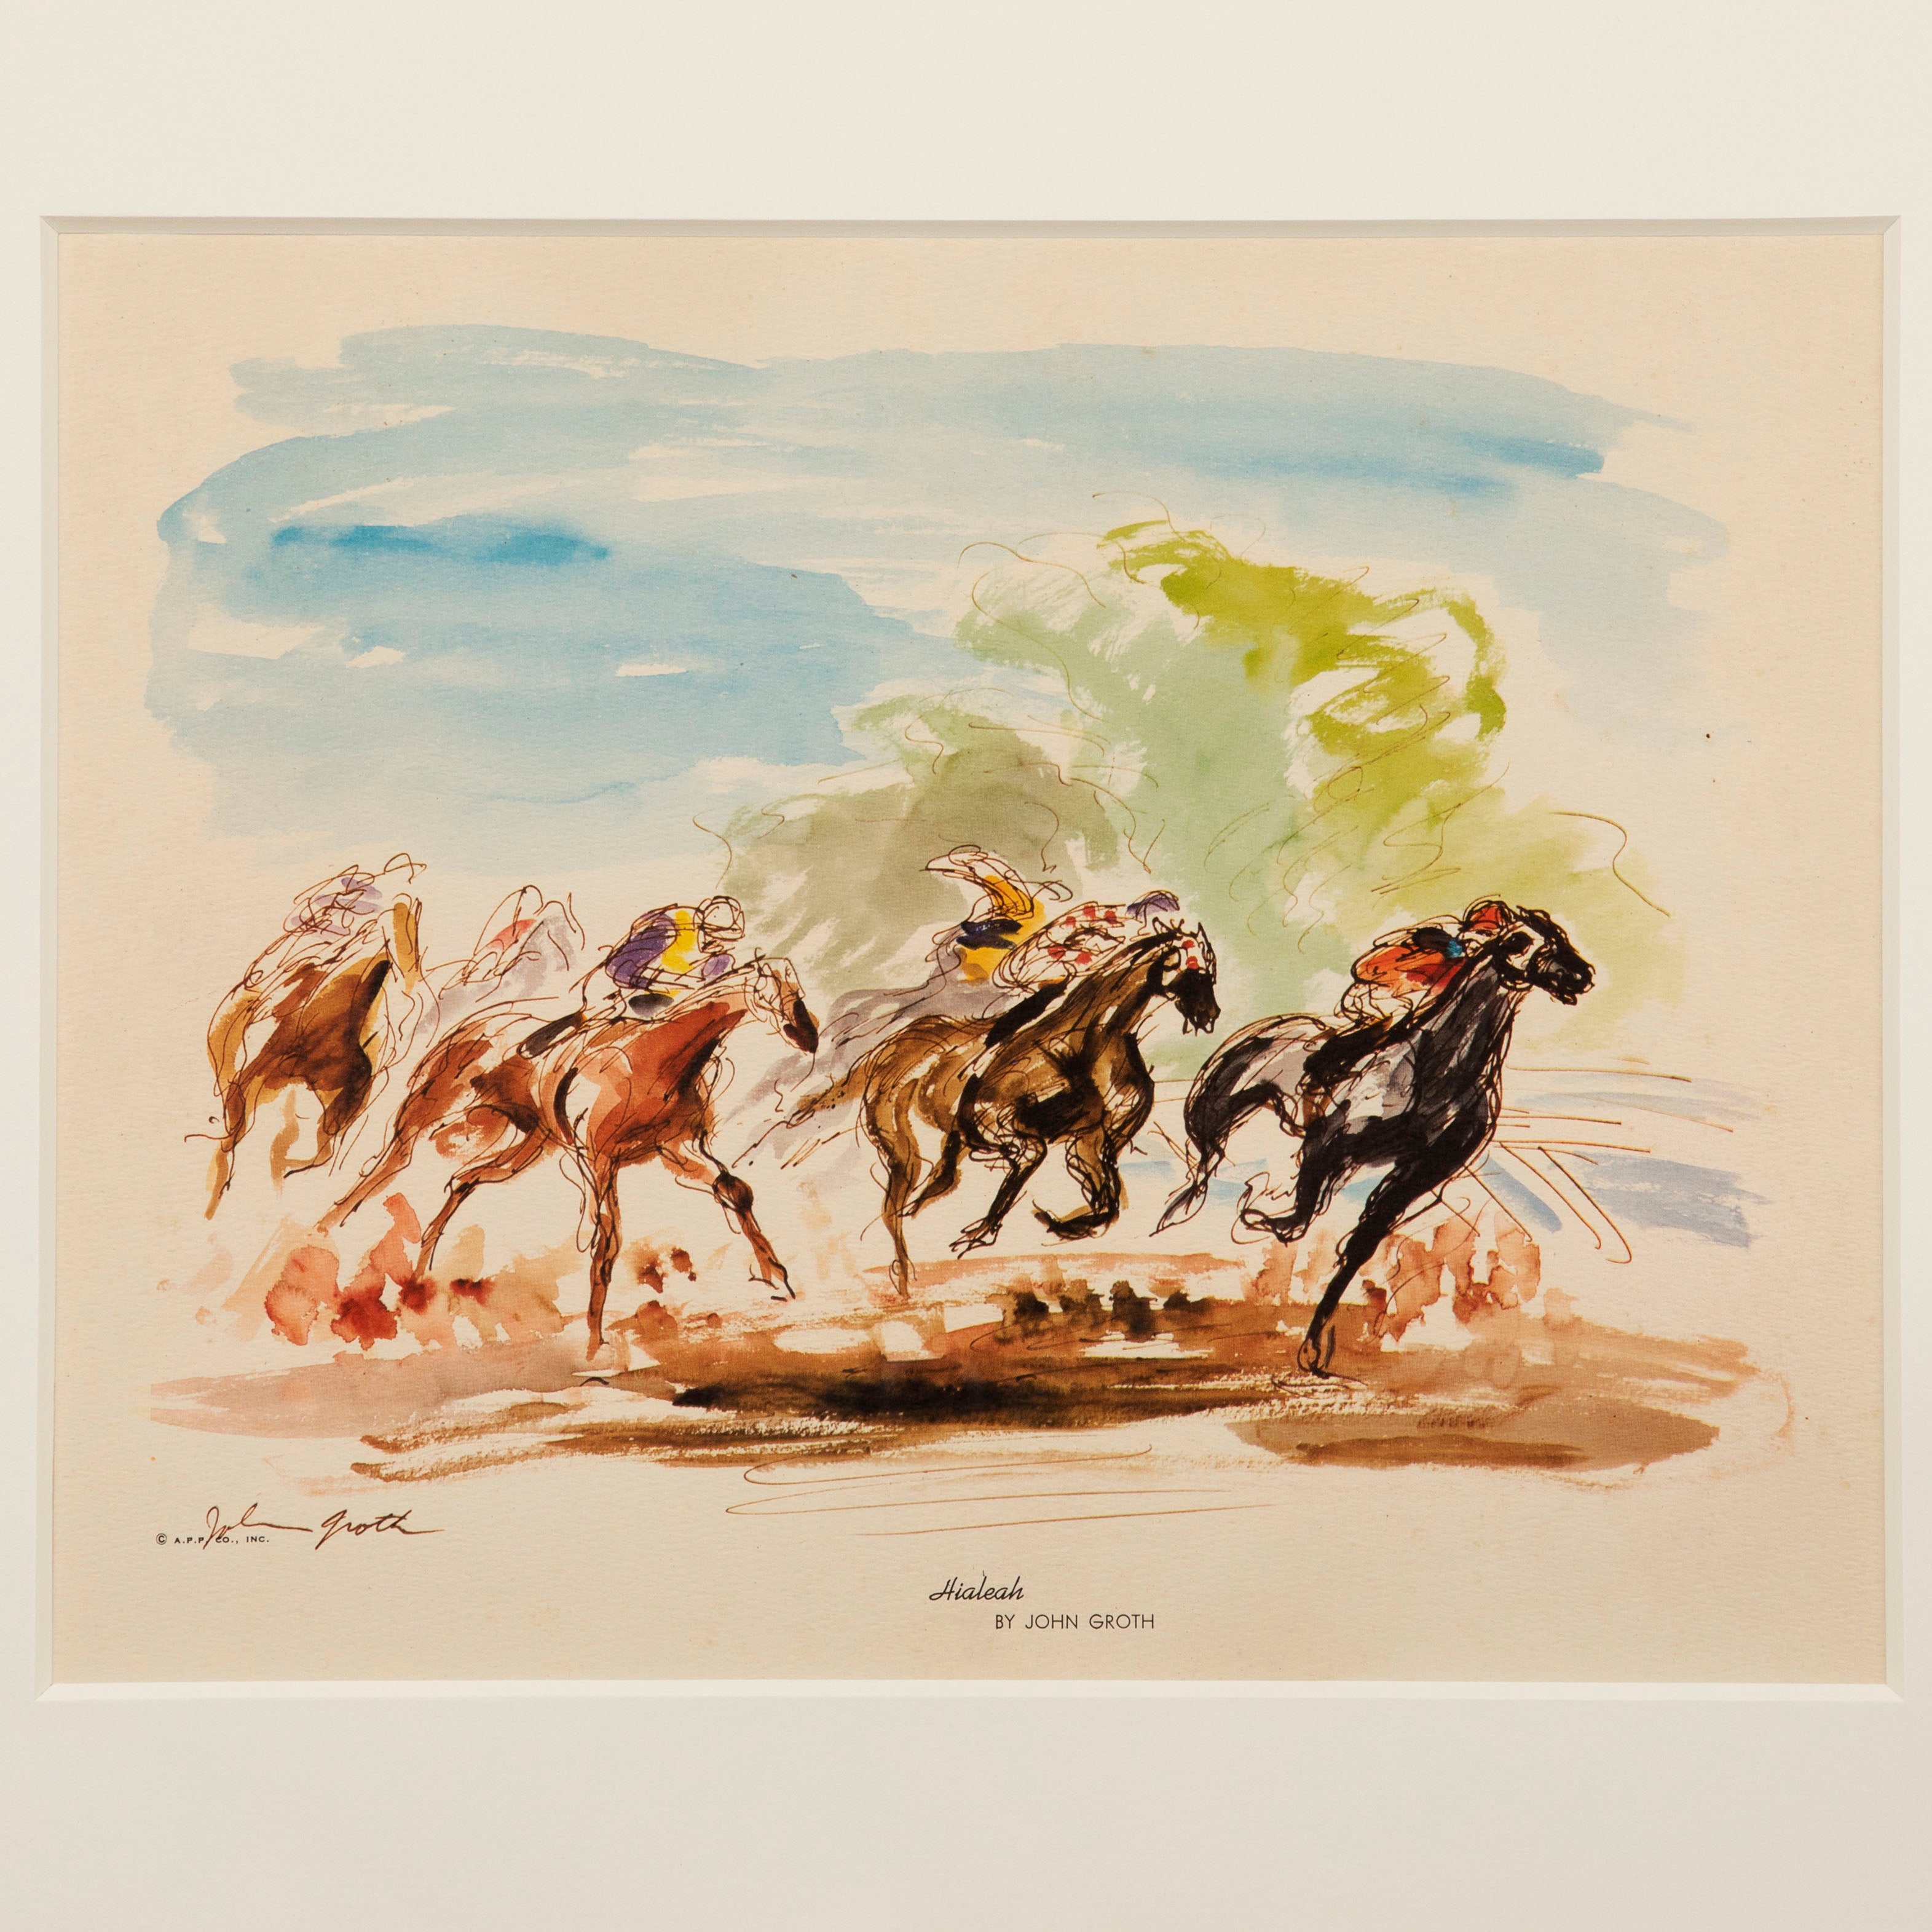 Framed "Hileah" by John Groth Horse Racing Lithograph